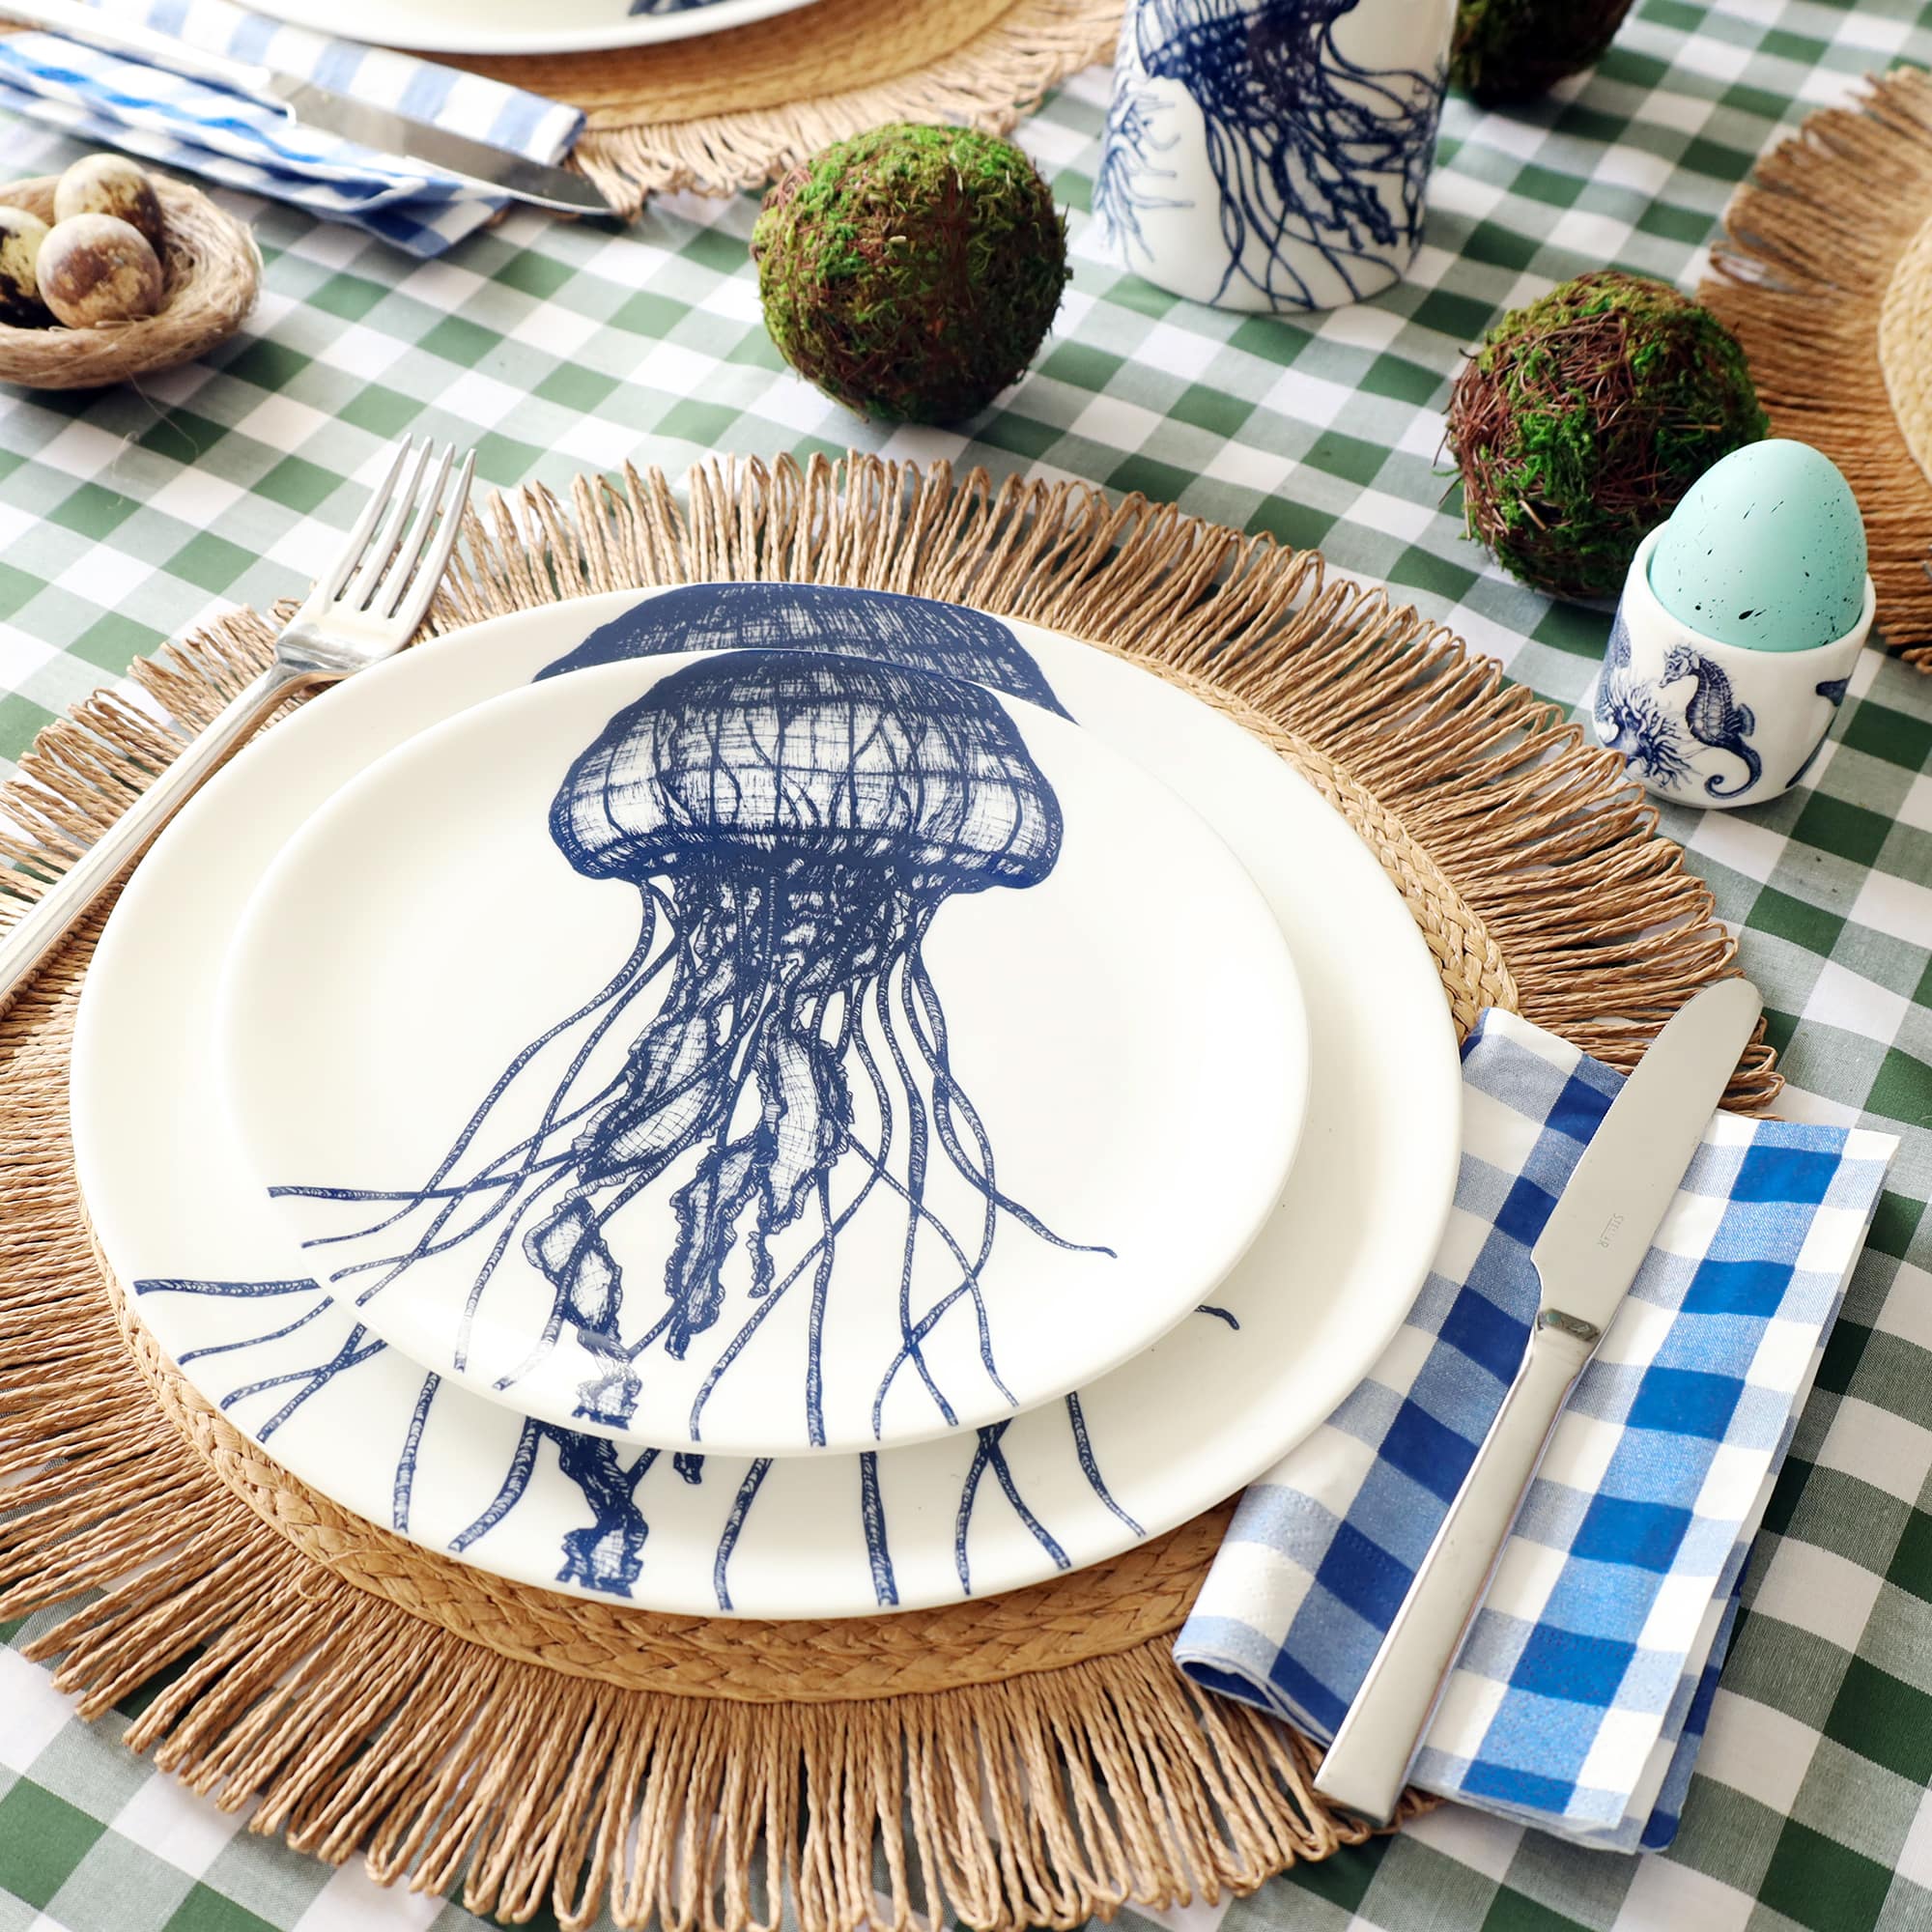 Bone China White  plate with hand drawn illustration our classic Jellyfish in Navy on a raffia placemat. The table has been set for Easter with moss balls and eggs in a nest and egg cups.